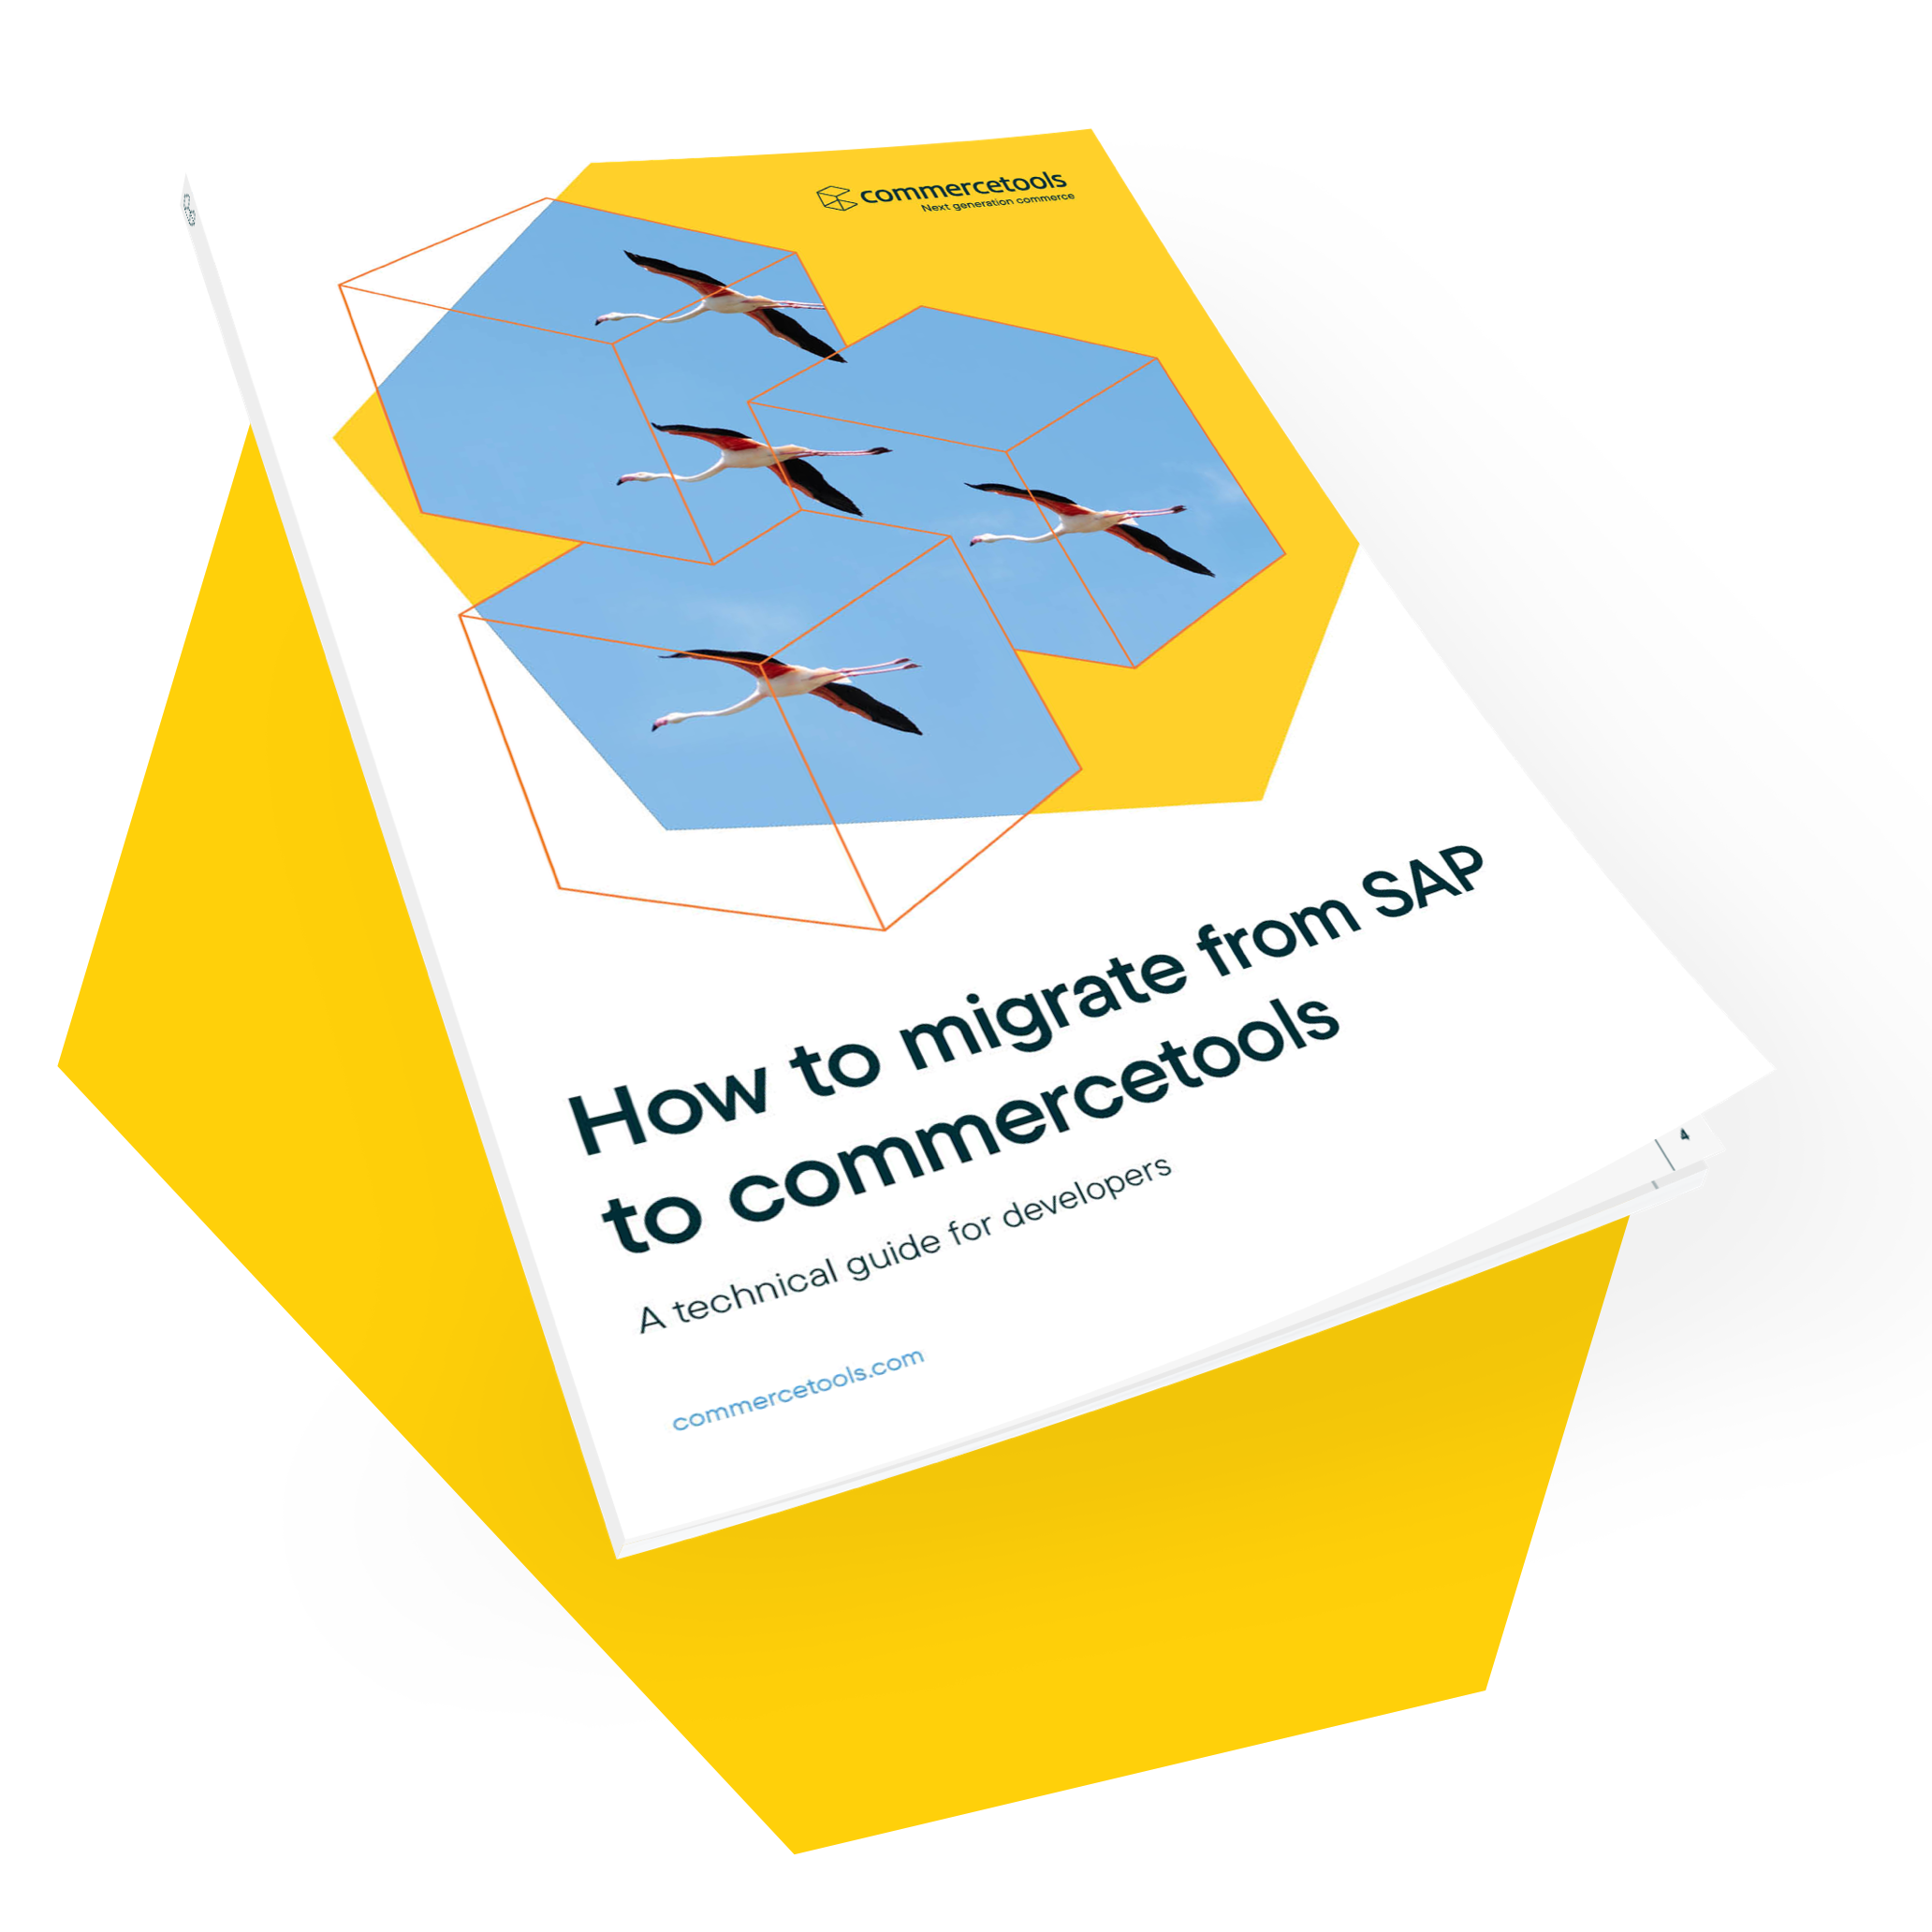 Whitepaper How to migrate from SAP to commercetools